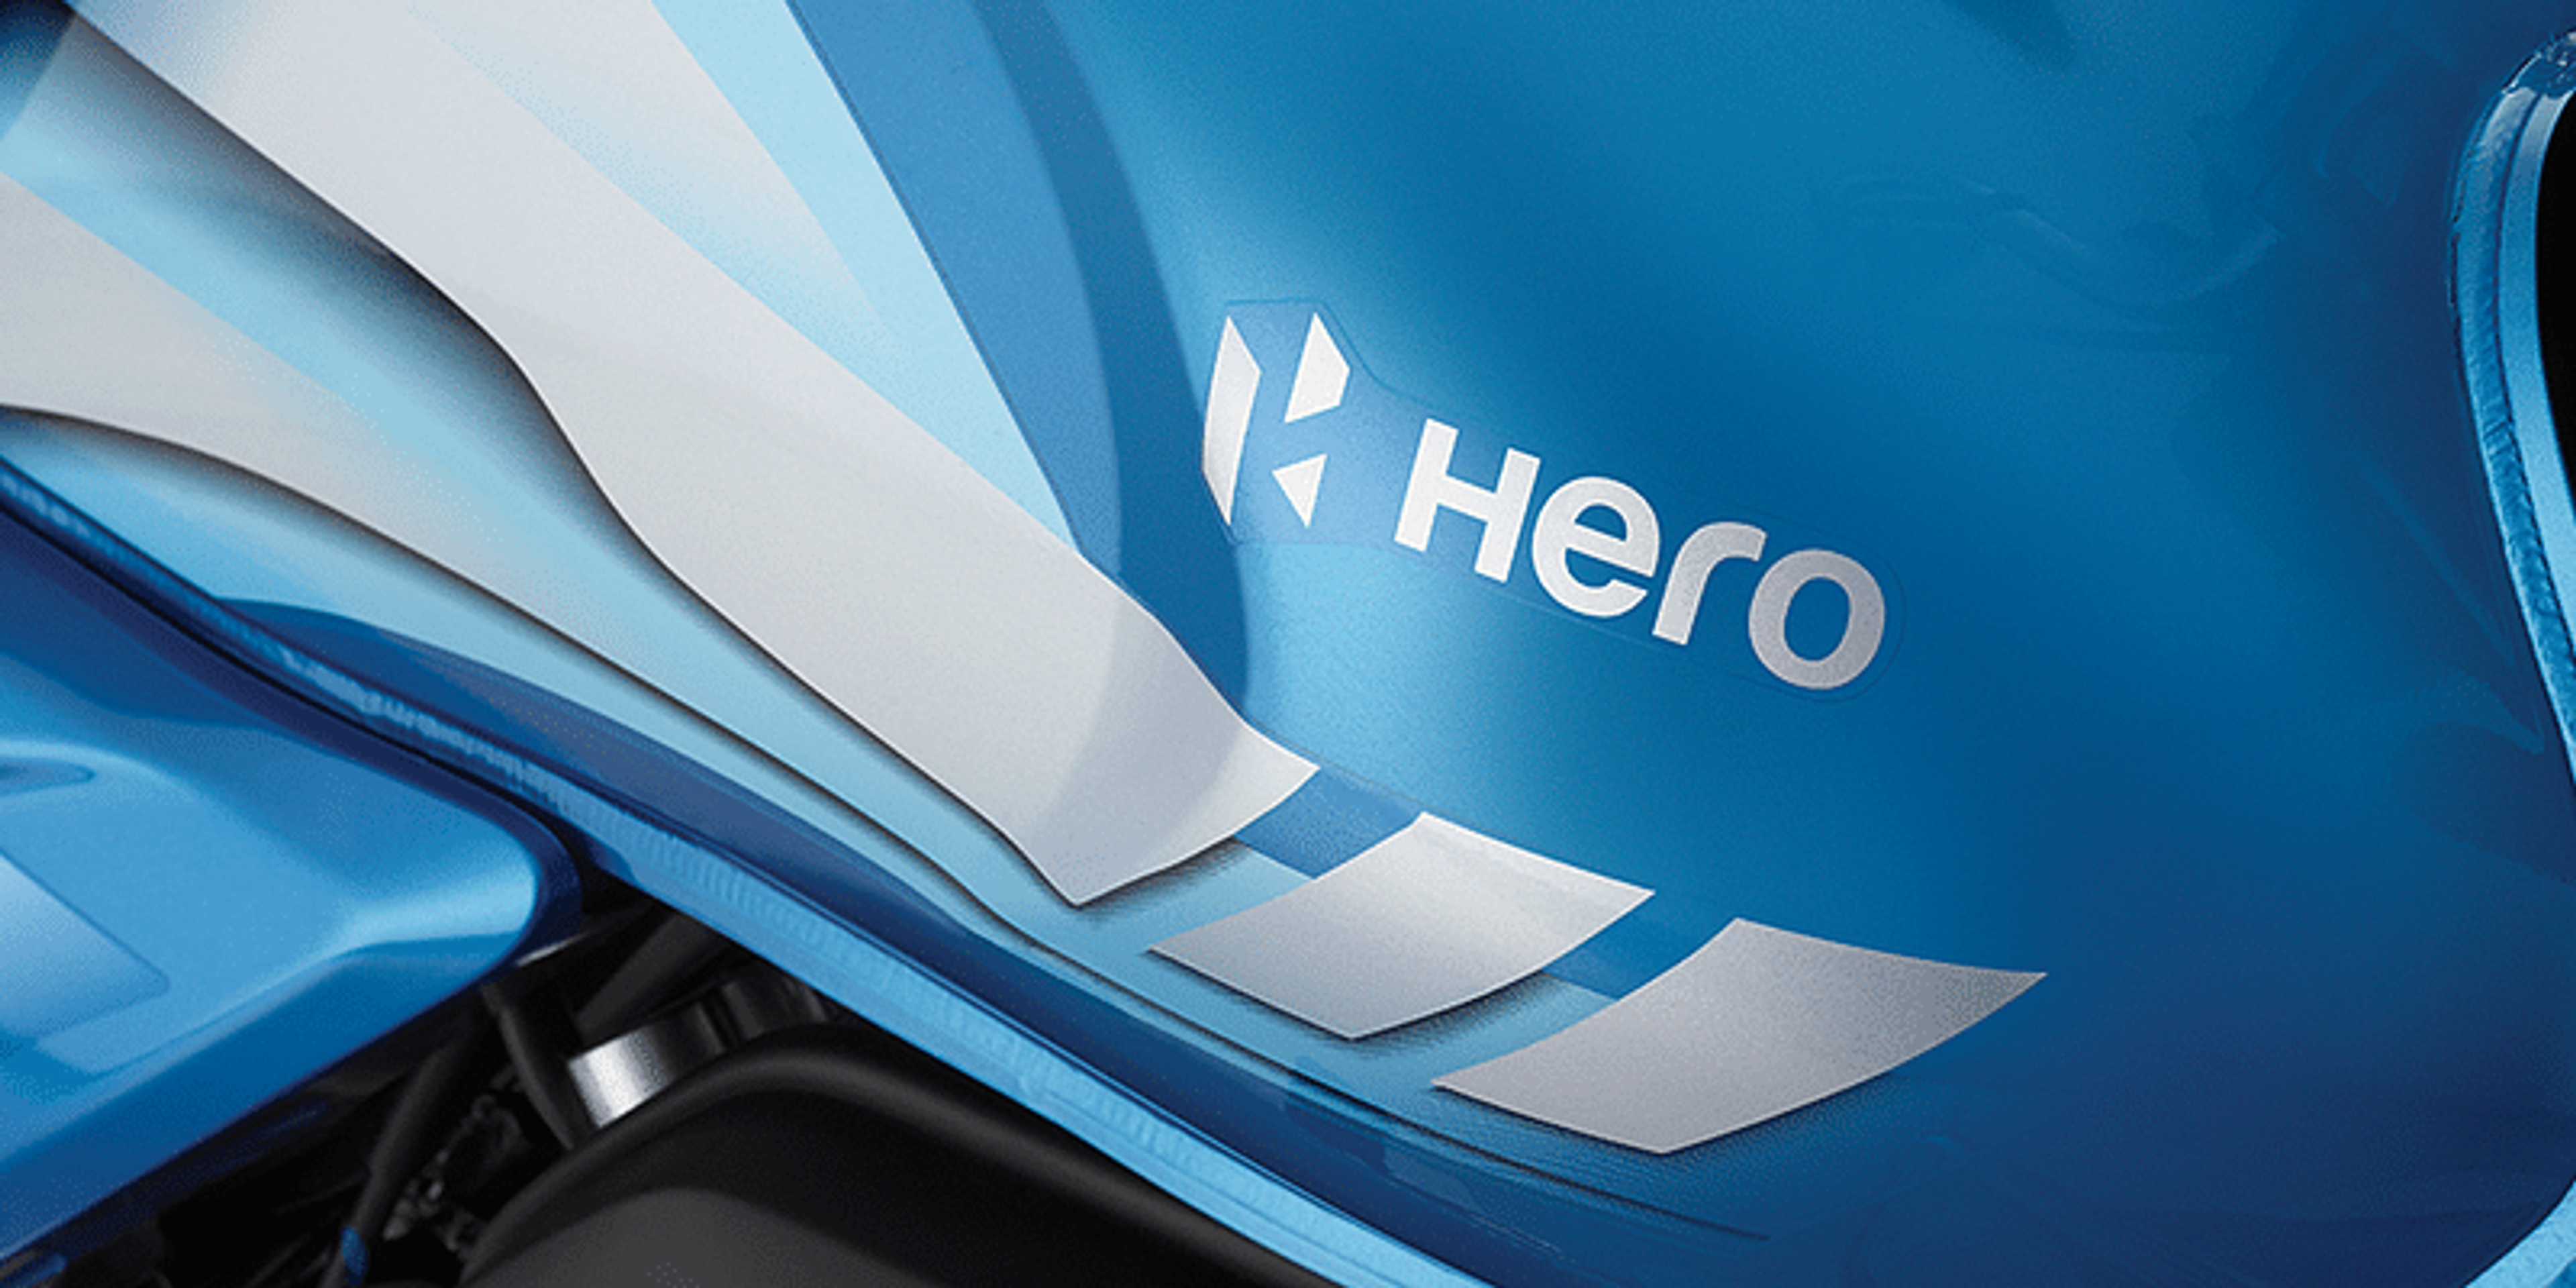 Hero MotoCorp set to roll out record number of products this year: CEO